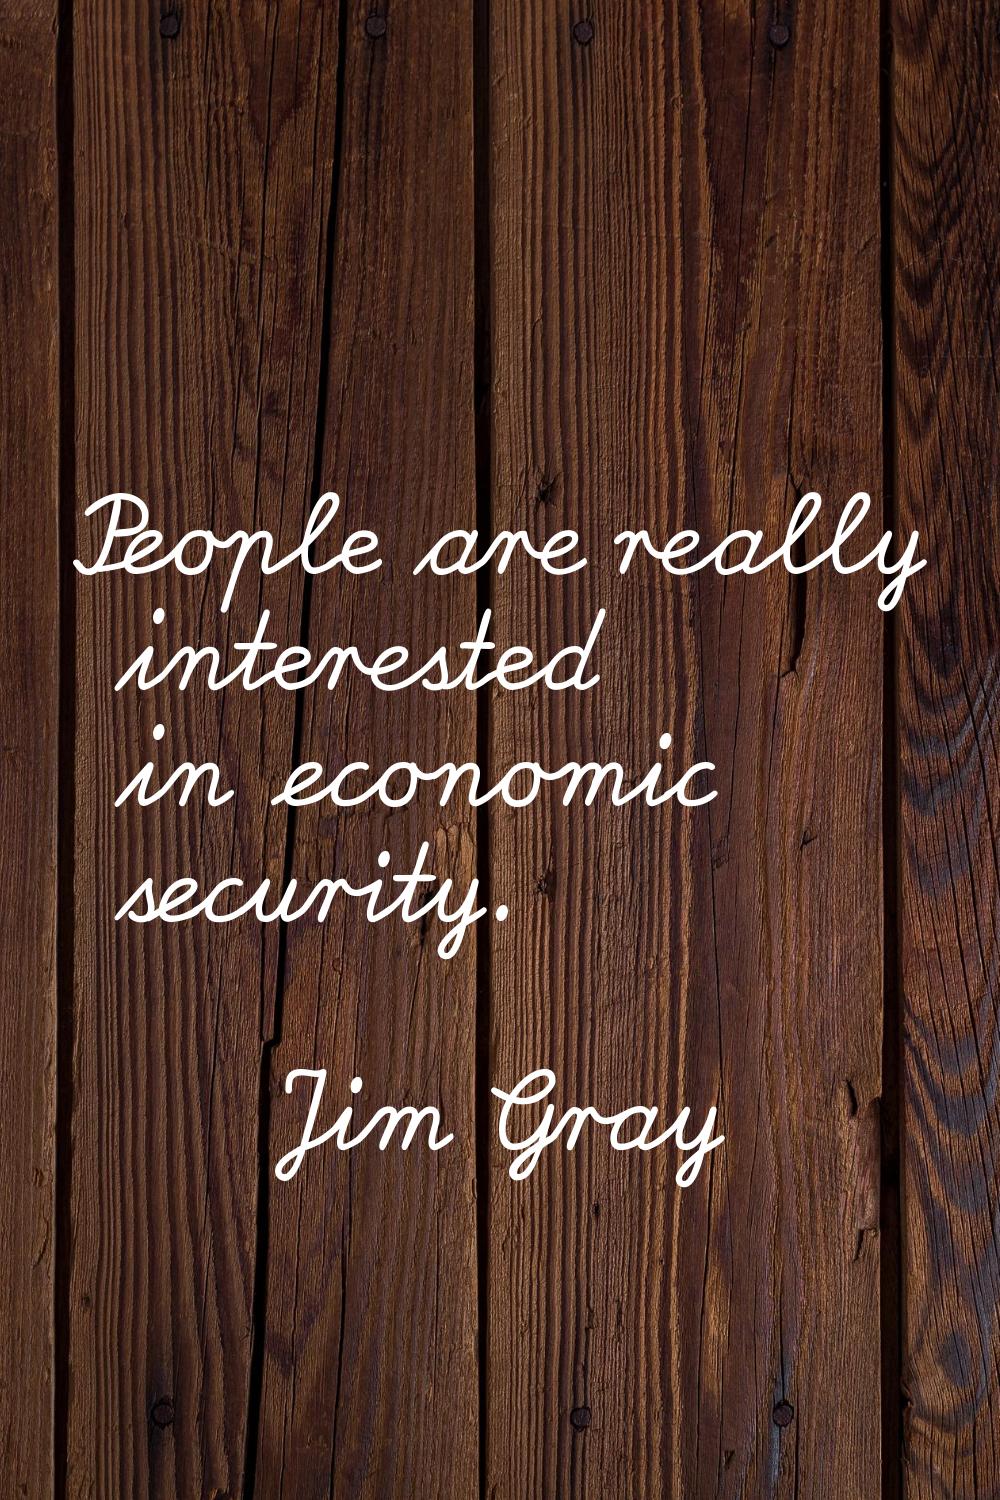 People are really interested in economic security.